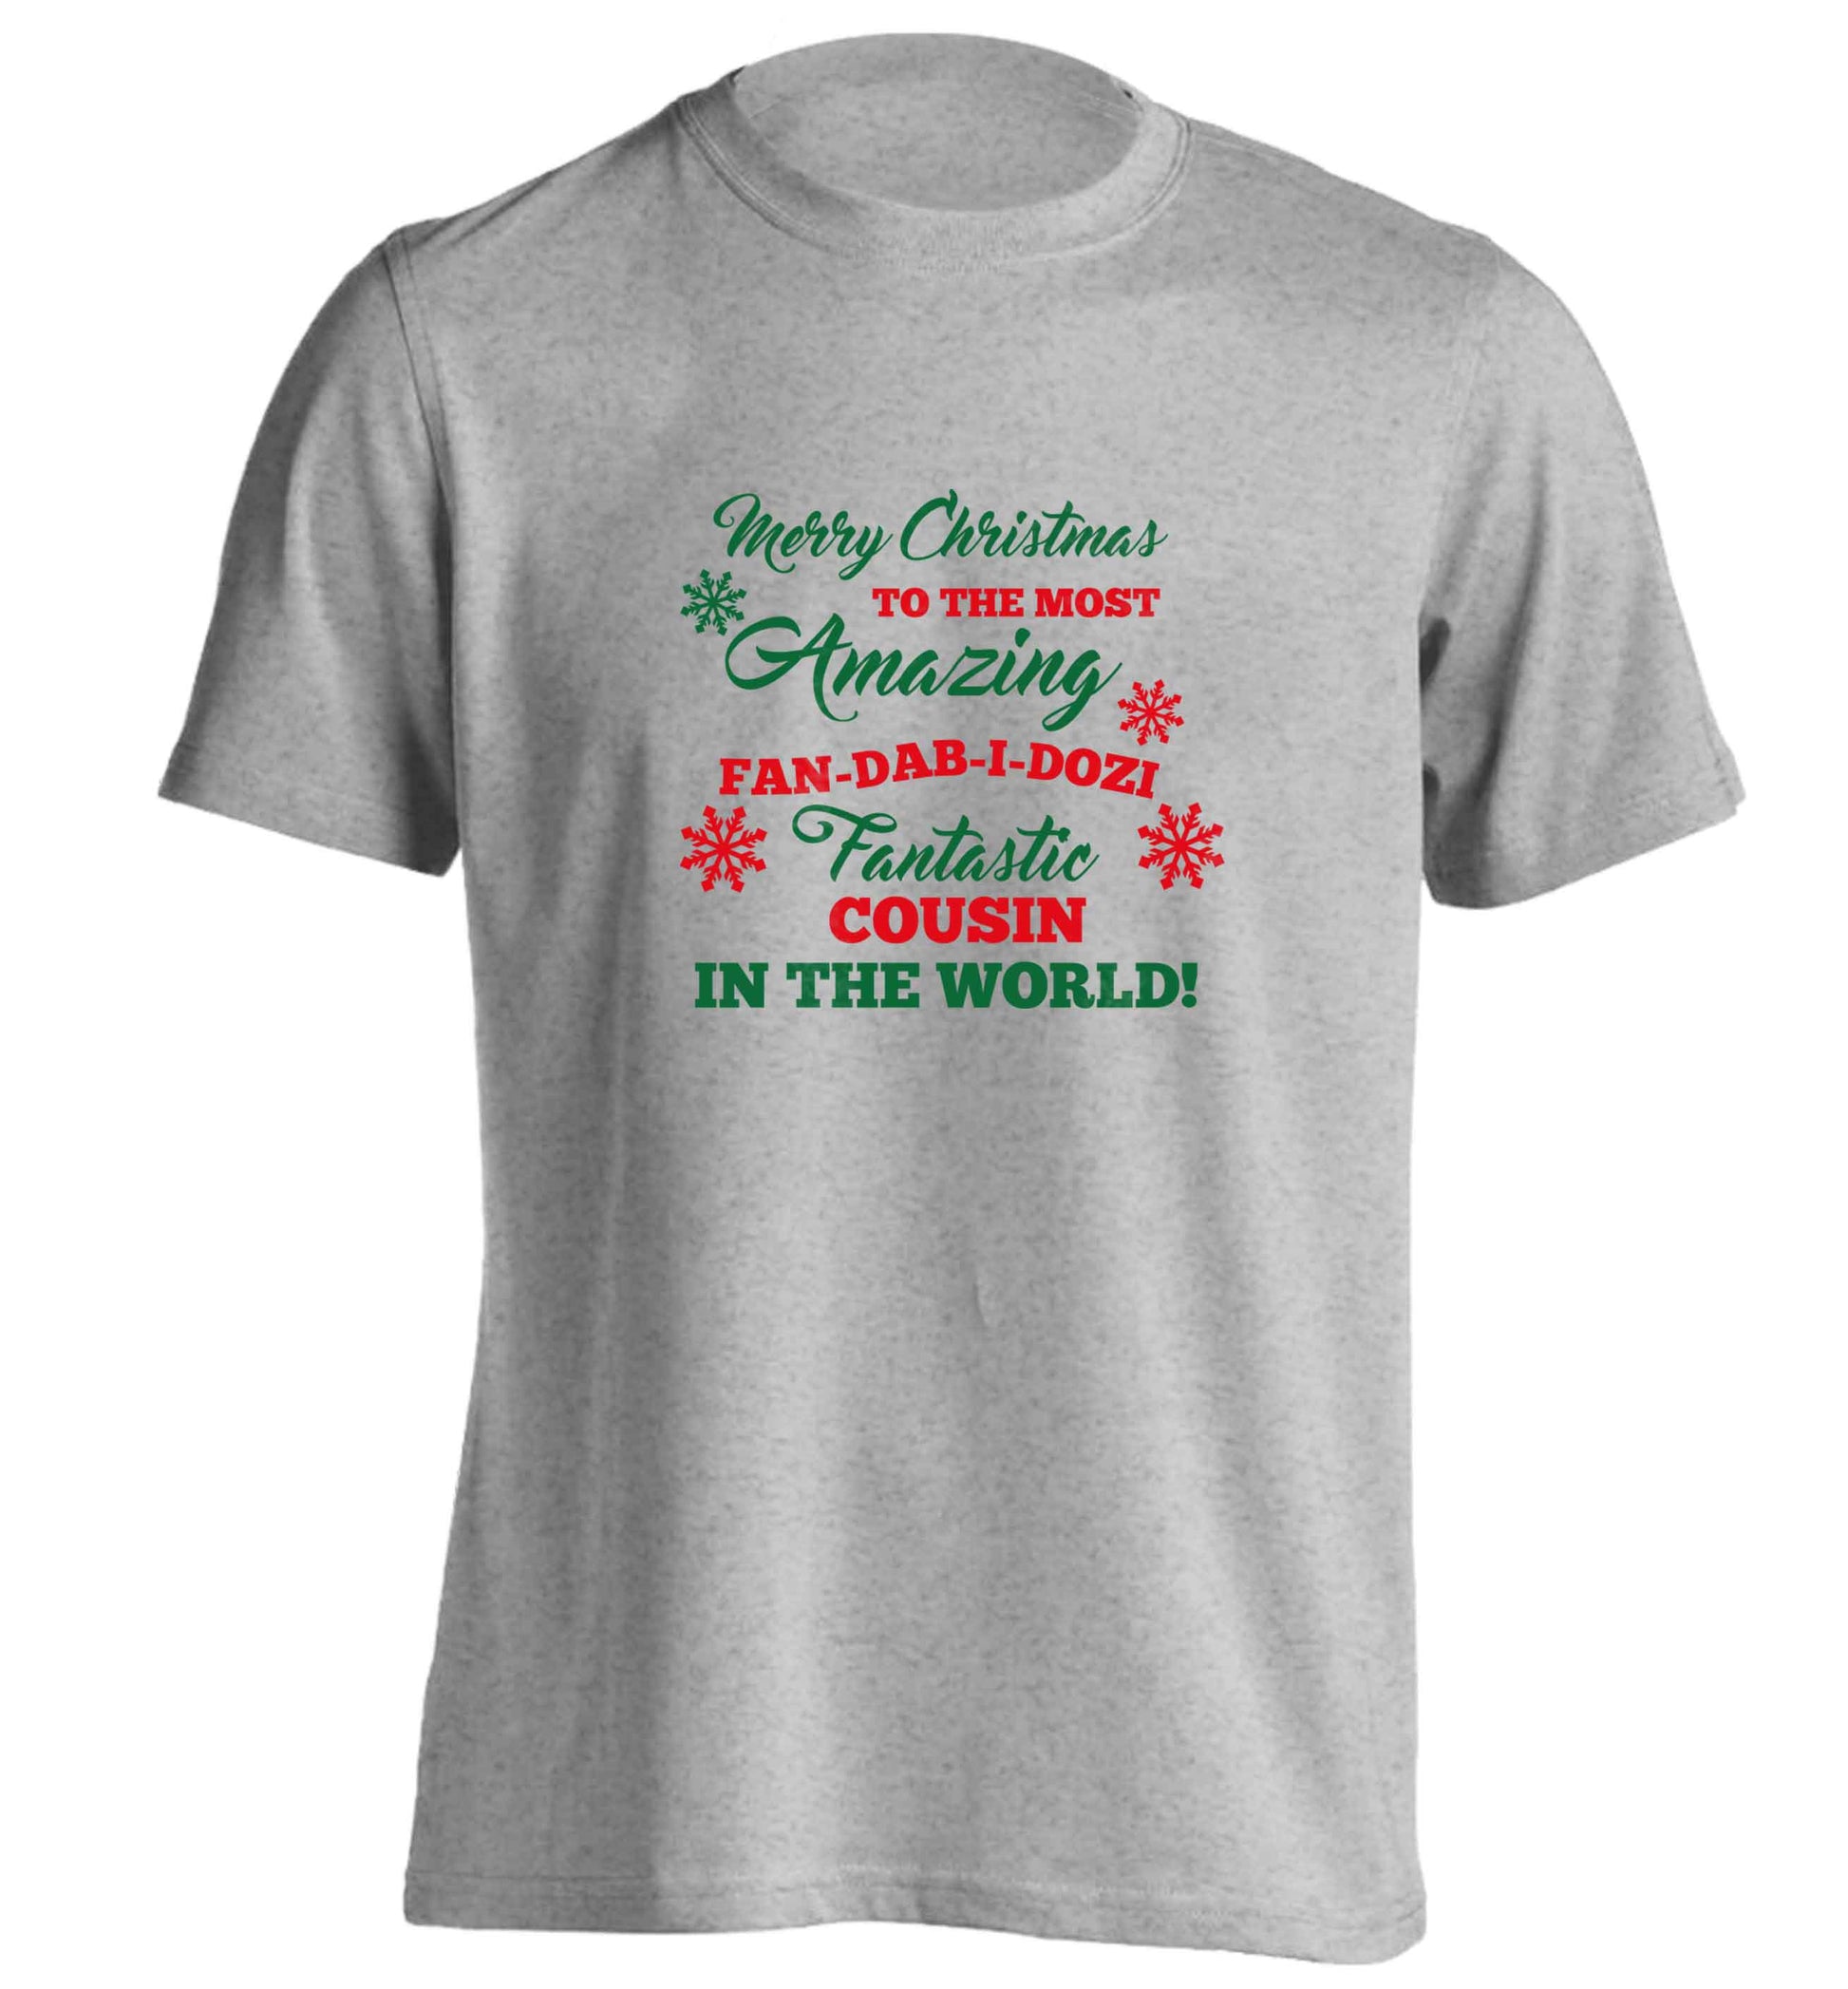 Merry Christmas to the most amazing fan-dab-i-dozi fantasic Cousin in the world adults unisex grey Tshirt 2XL